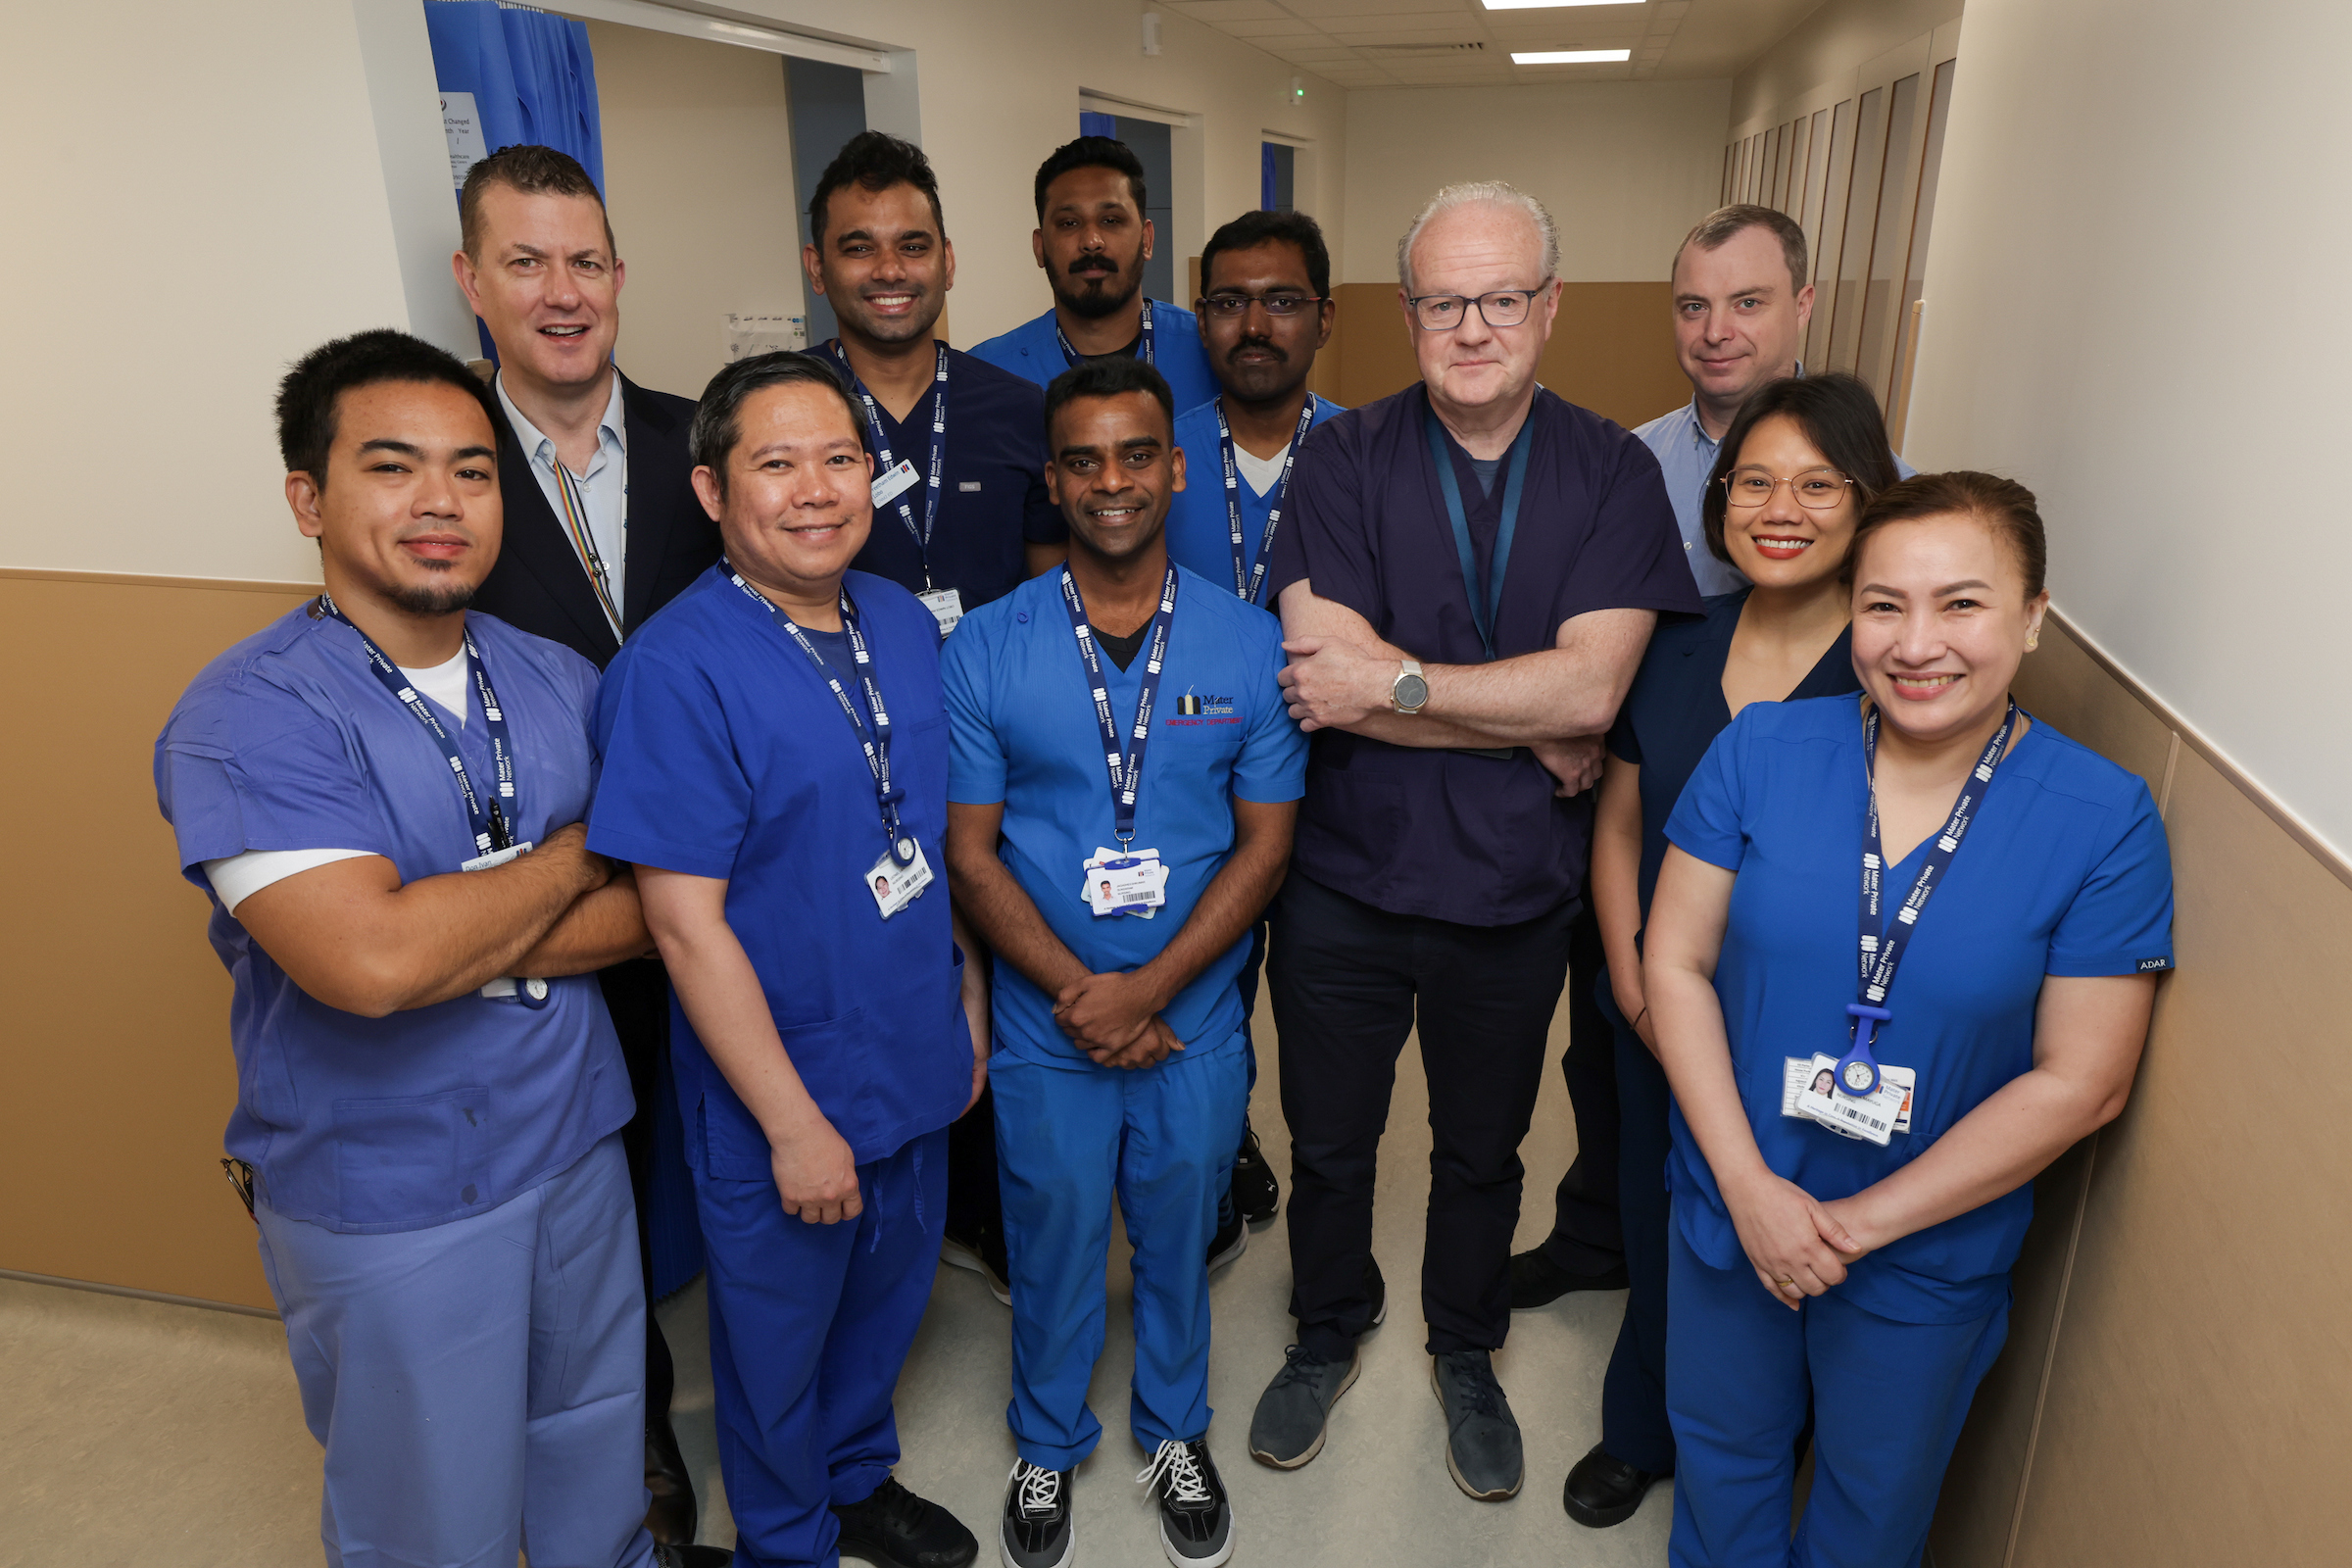 The Emergency Department team are standing side by side. They are wearing a mixture of light blue and dark blue scrubs and are posing beside the new patient bays.